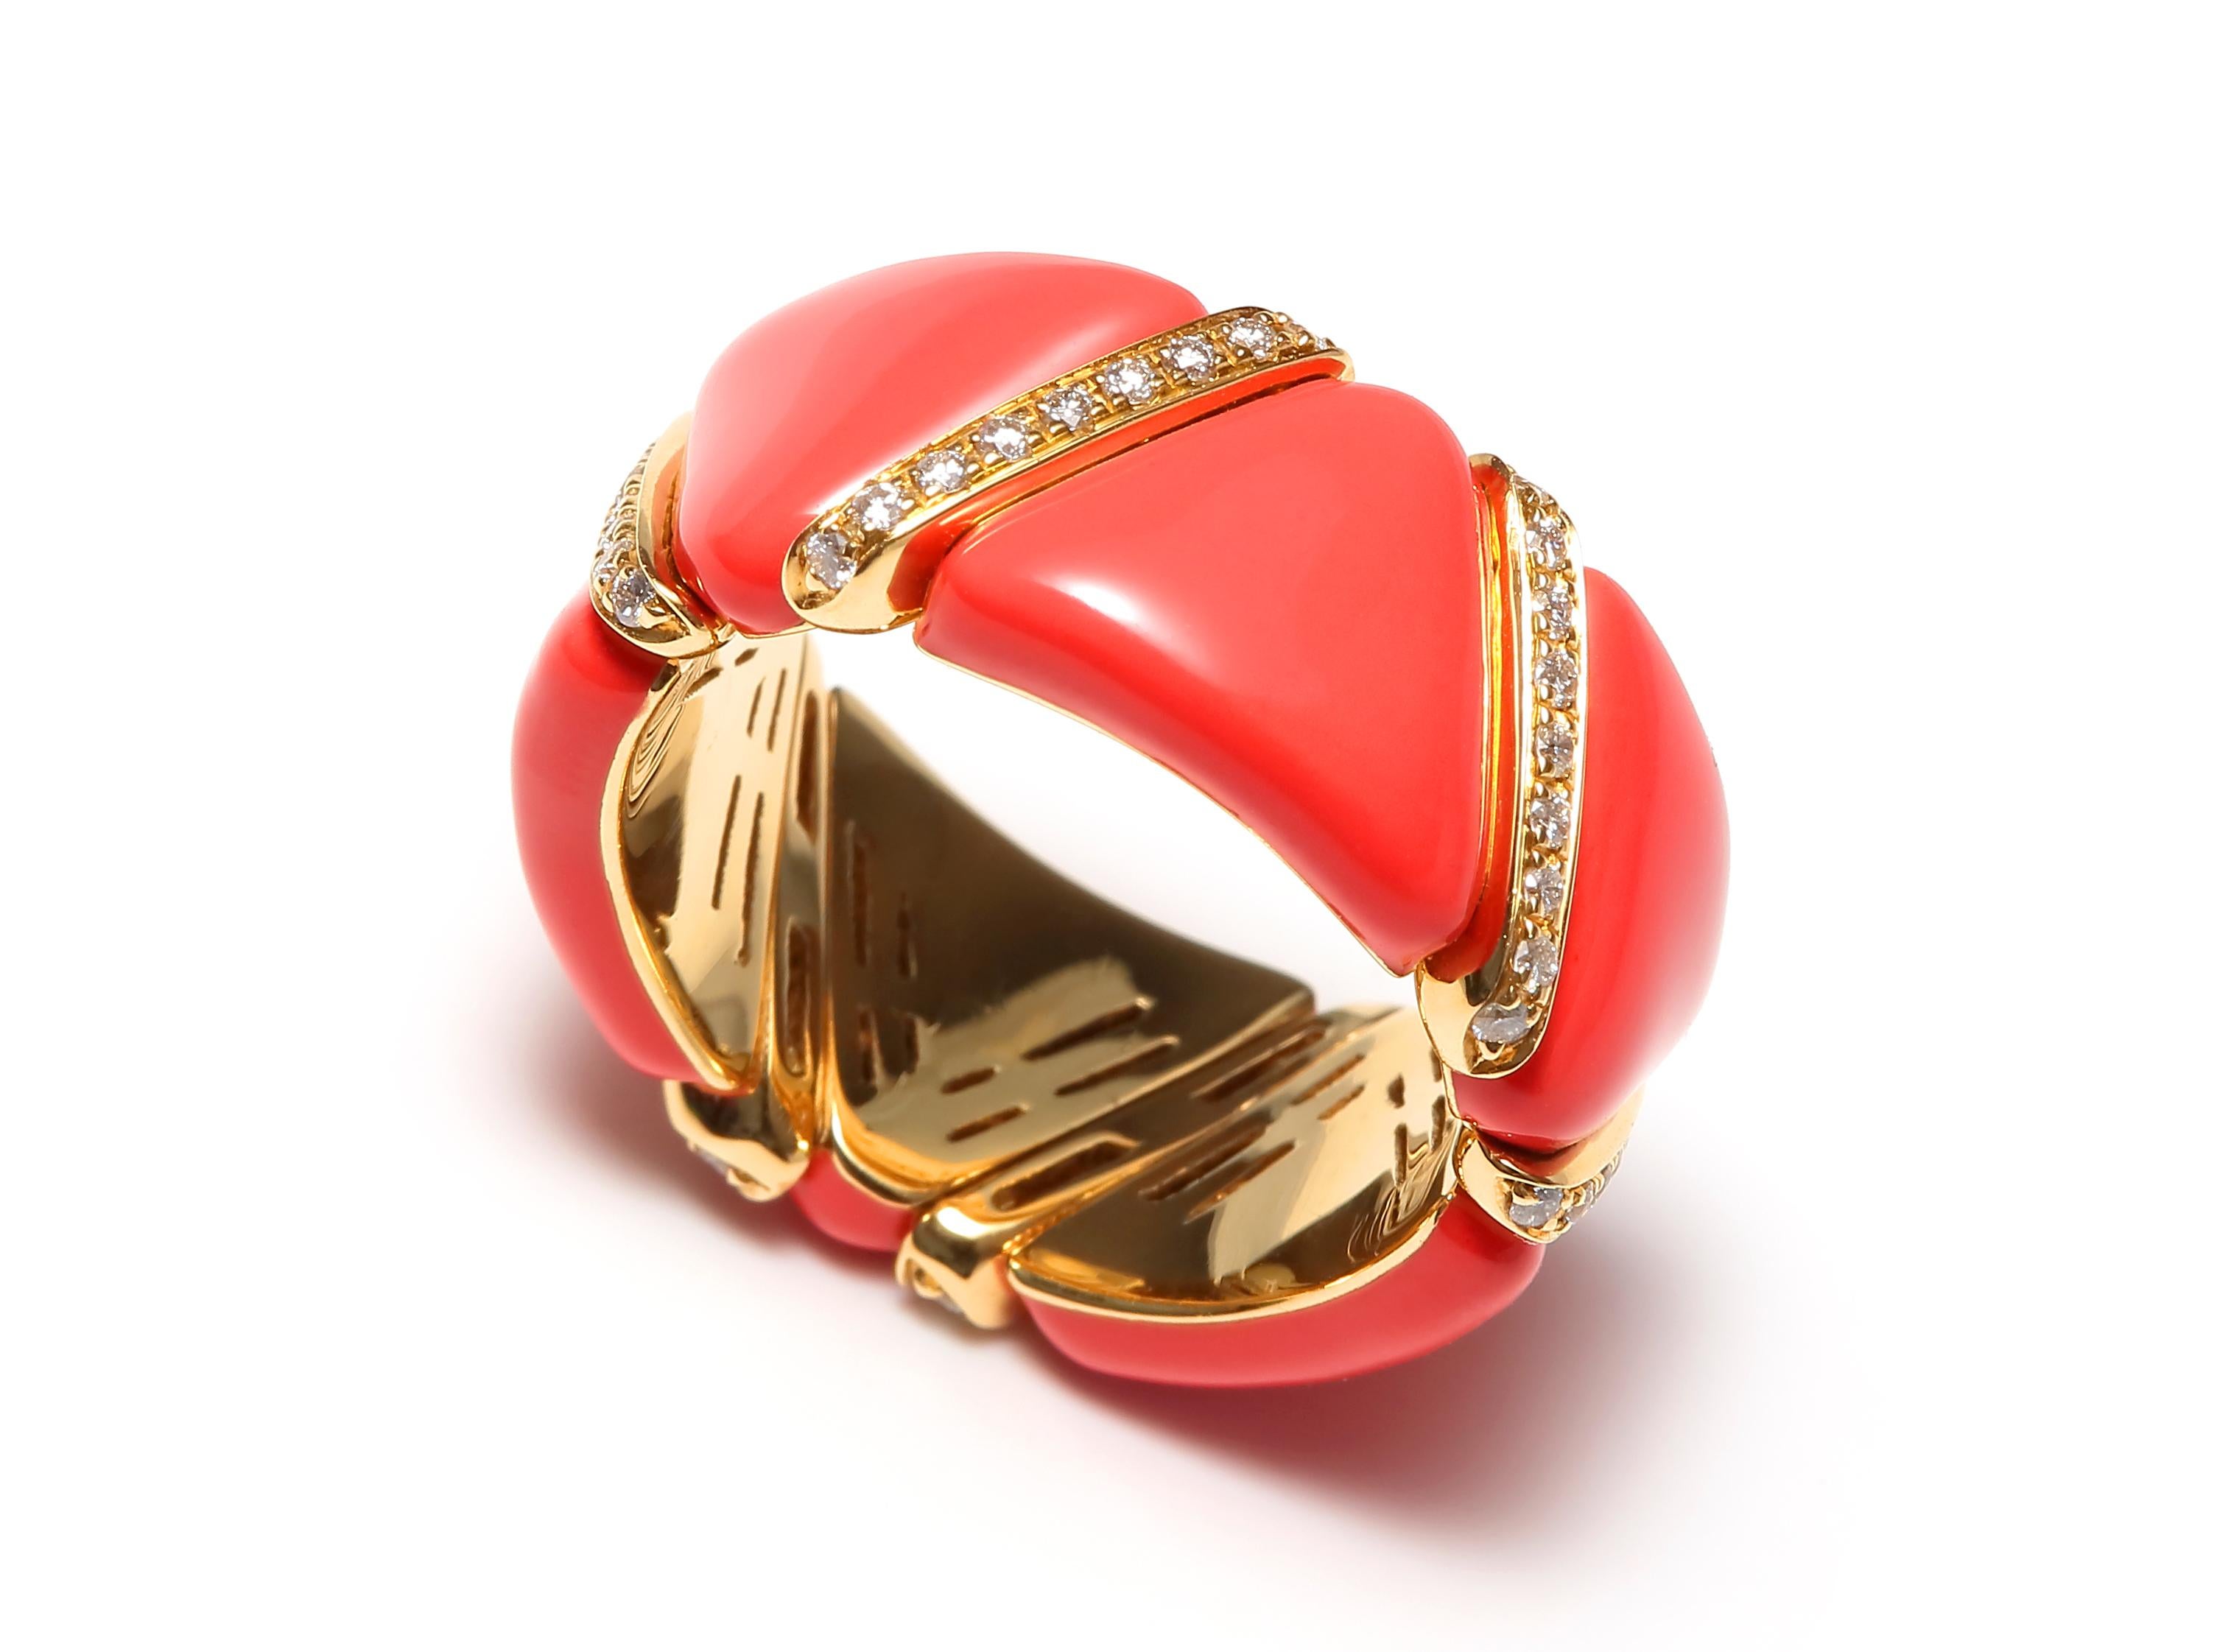 Diamond Enamel Red Coral Glaze Ring

Diamond Red Coral Enamel Flexible Eternity Band Unique 18 Karat Yellow Gold Ring

Mixing an art deco aesthetic with contemporary flair, the hand-made rings in pink, white and yellow 18k gold are versatile and